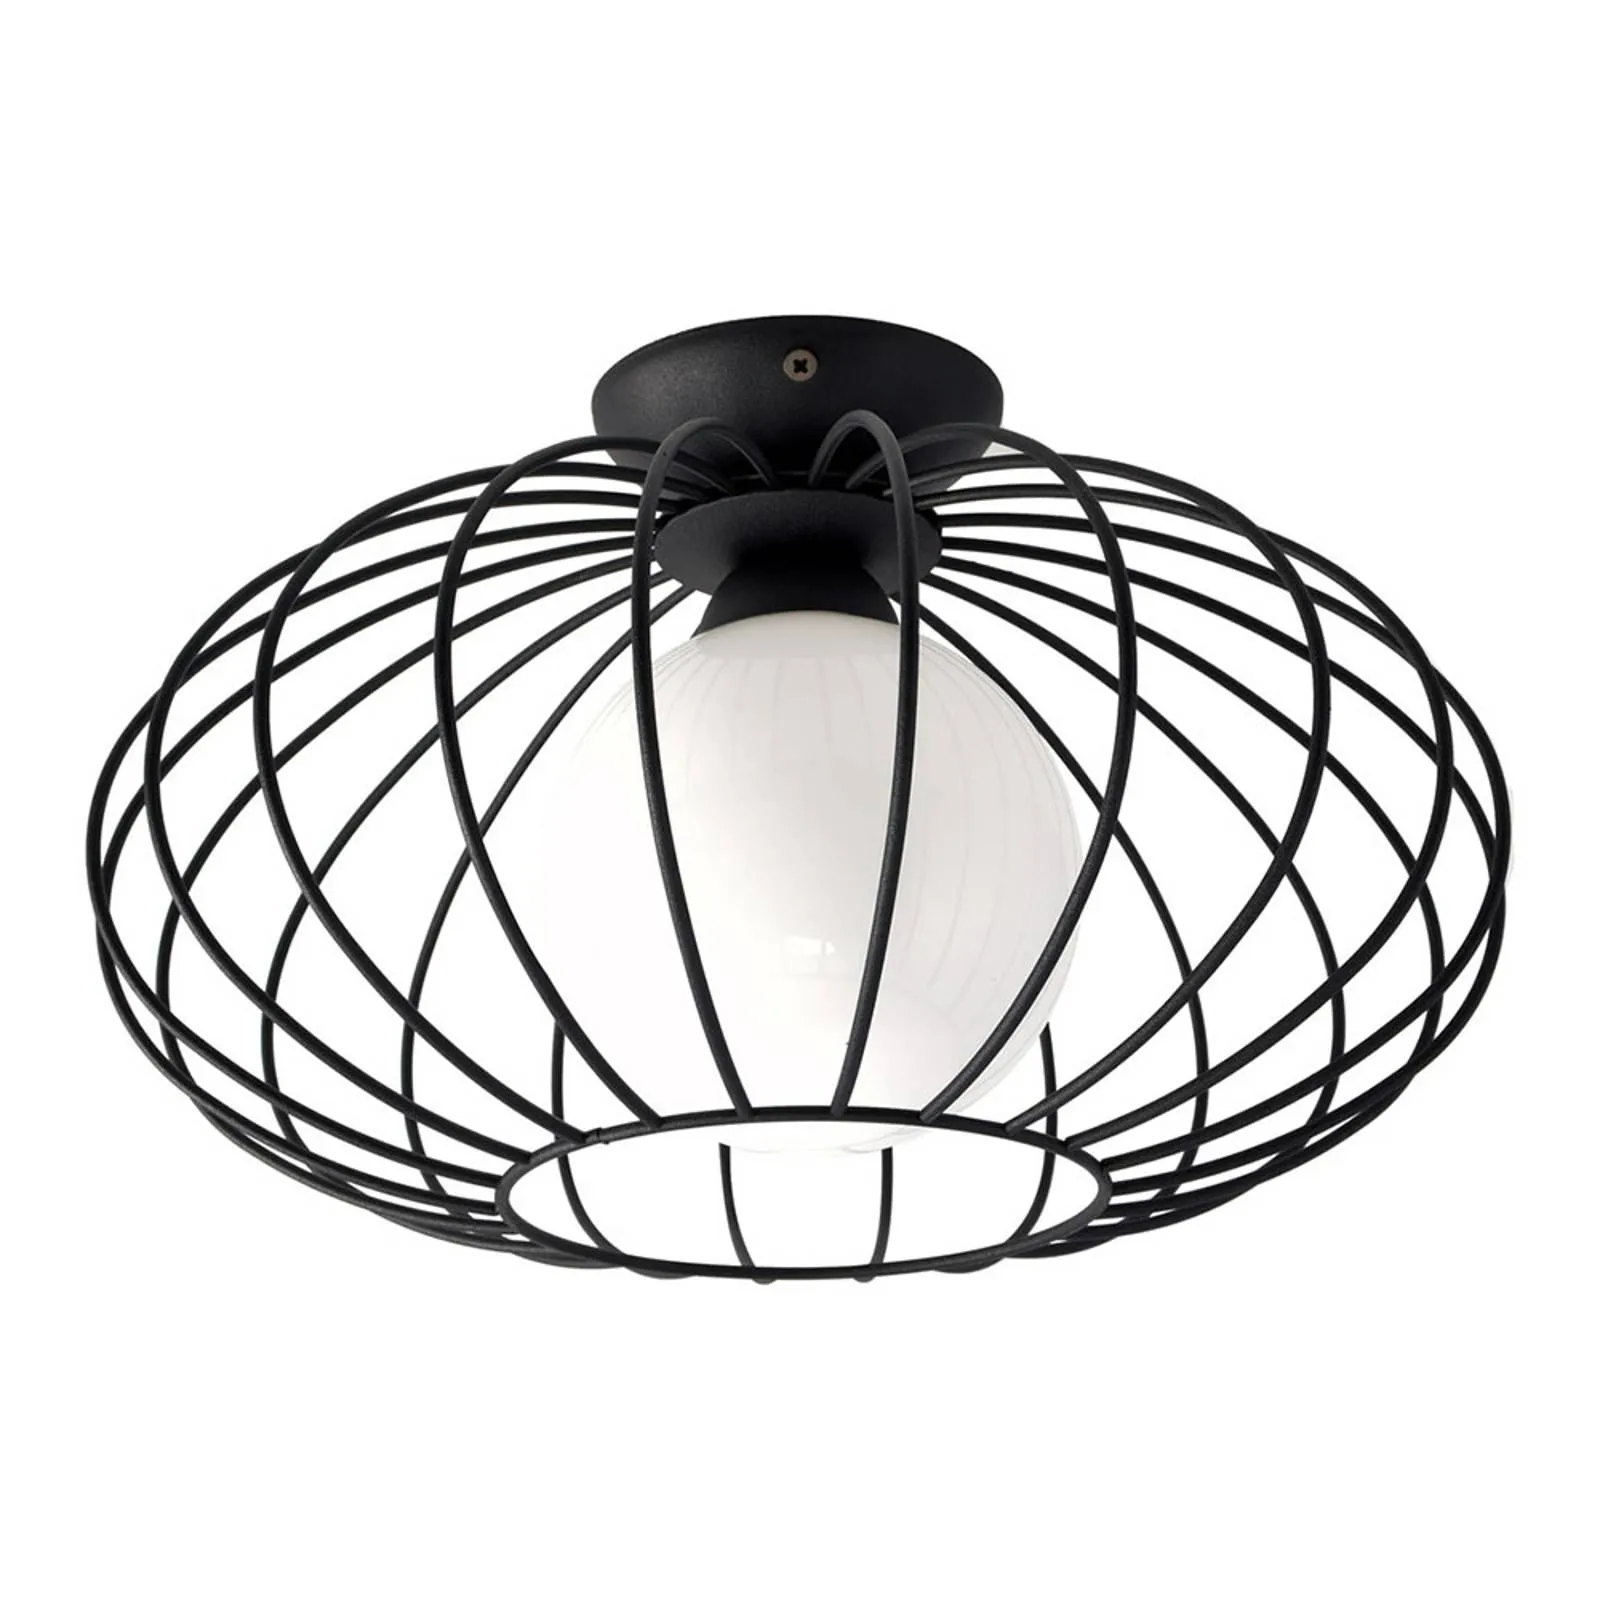 Kronos ceiling lamp, black cage, one opal balls